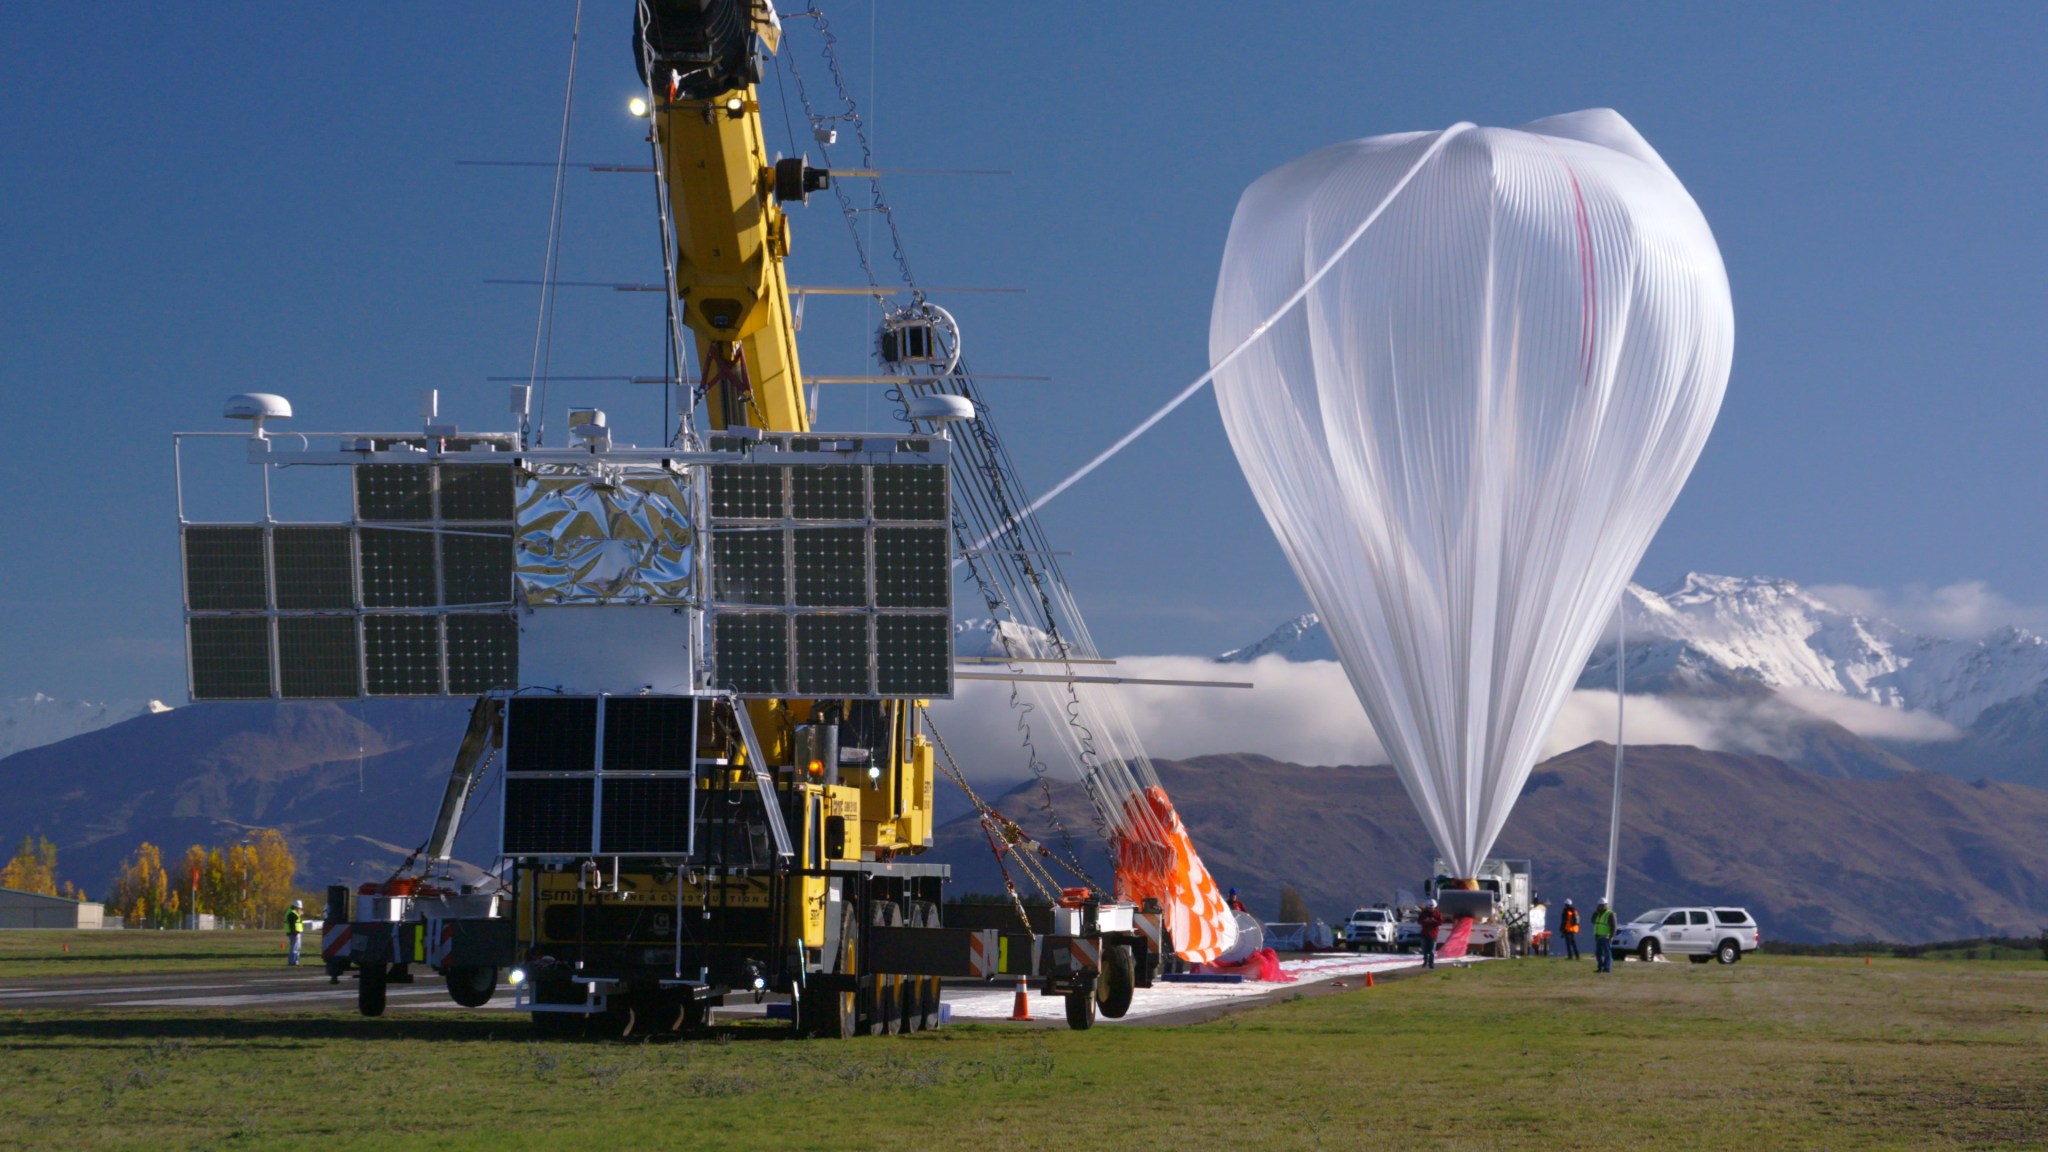 A crane is leading a scientific balloon before launch. The balloon is to the right, and appears an a plastic, upside down teardrop. A tube attached to the top of the balloon leads down to the ground where a number of personnel are holding it. To the left, a crane holding a large payload structure with many solar panels is attached to the end of the balloon.